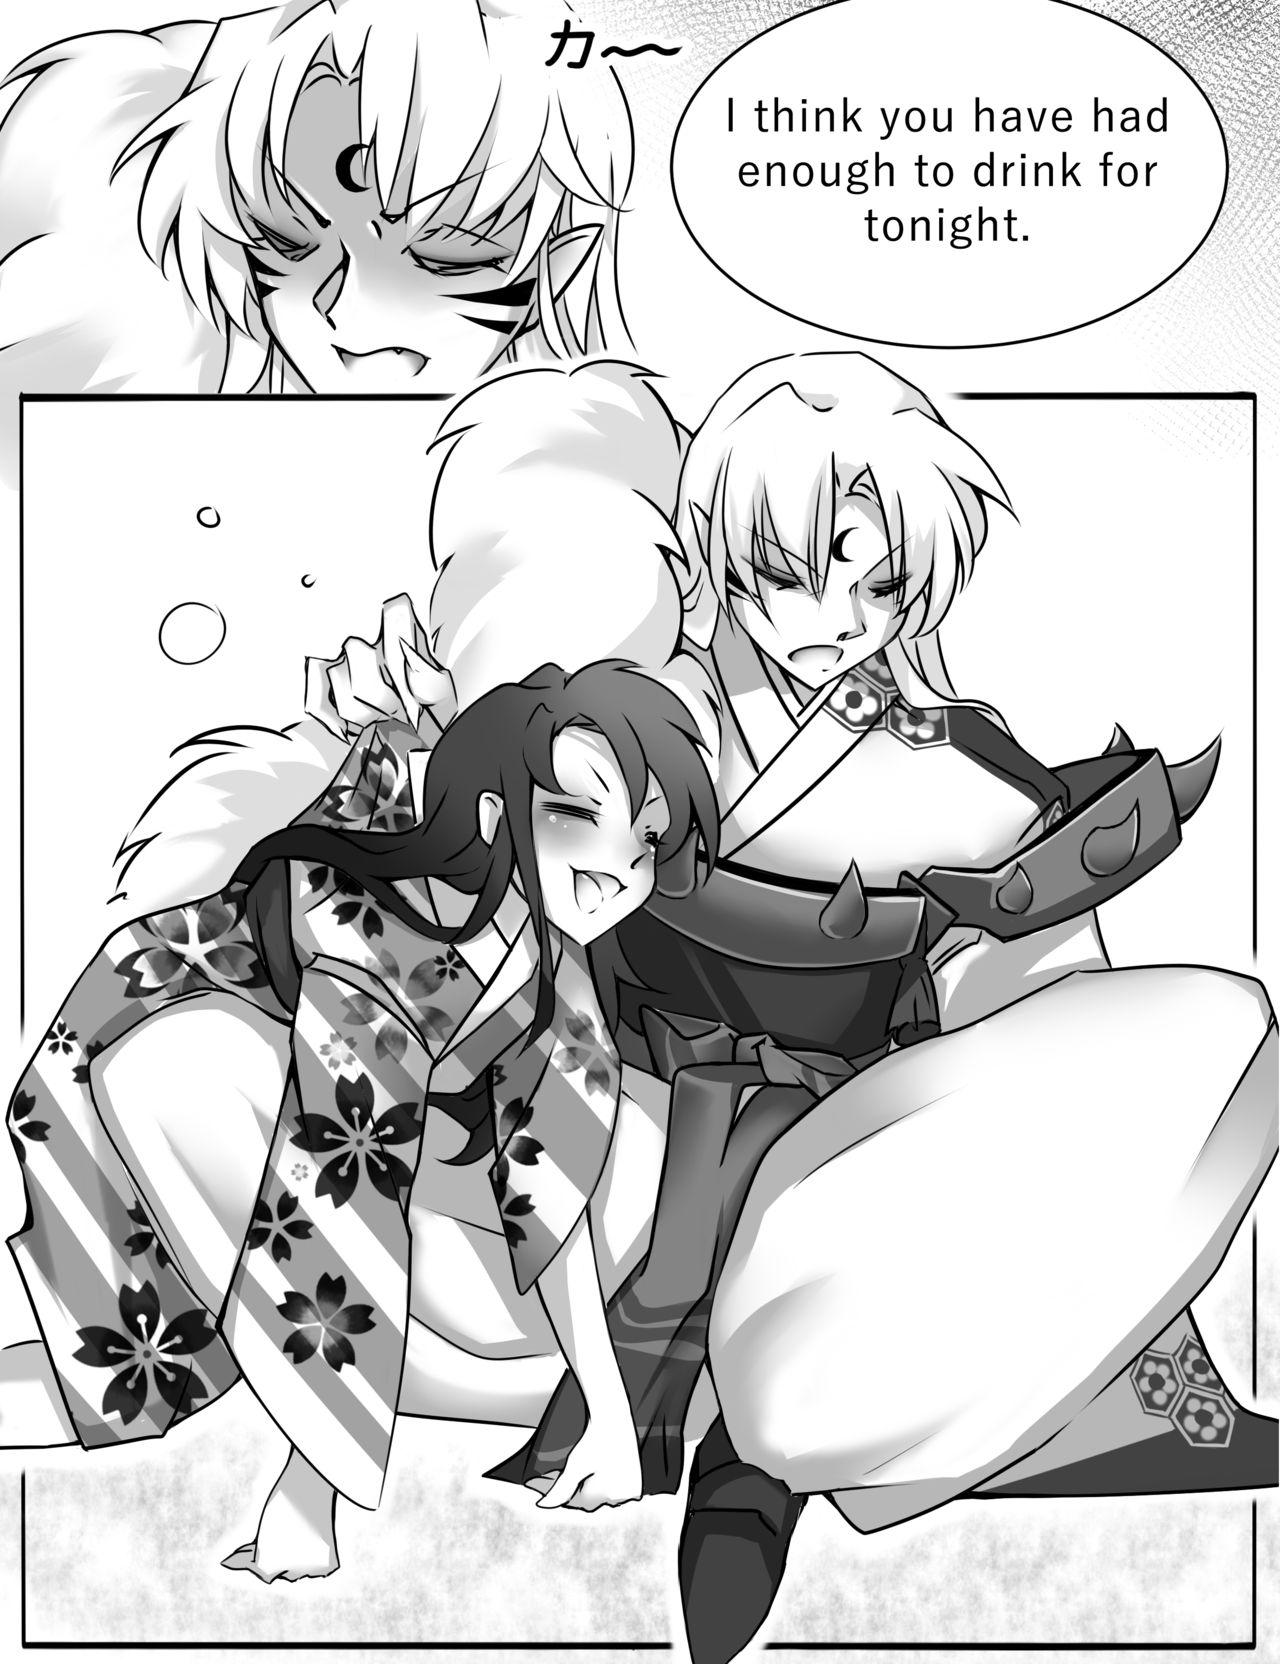 Housewife A fun night - Inuyasha Lingerie - Page 7